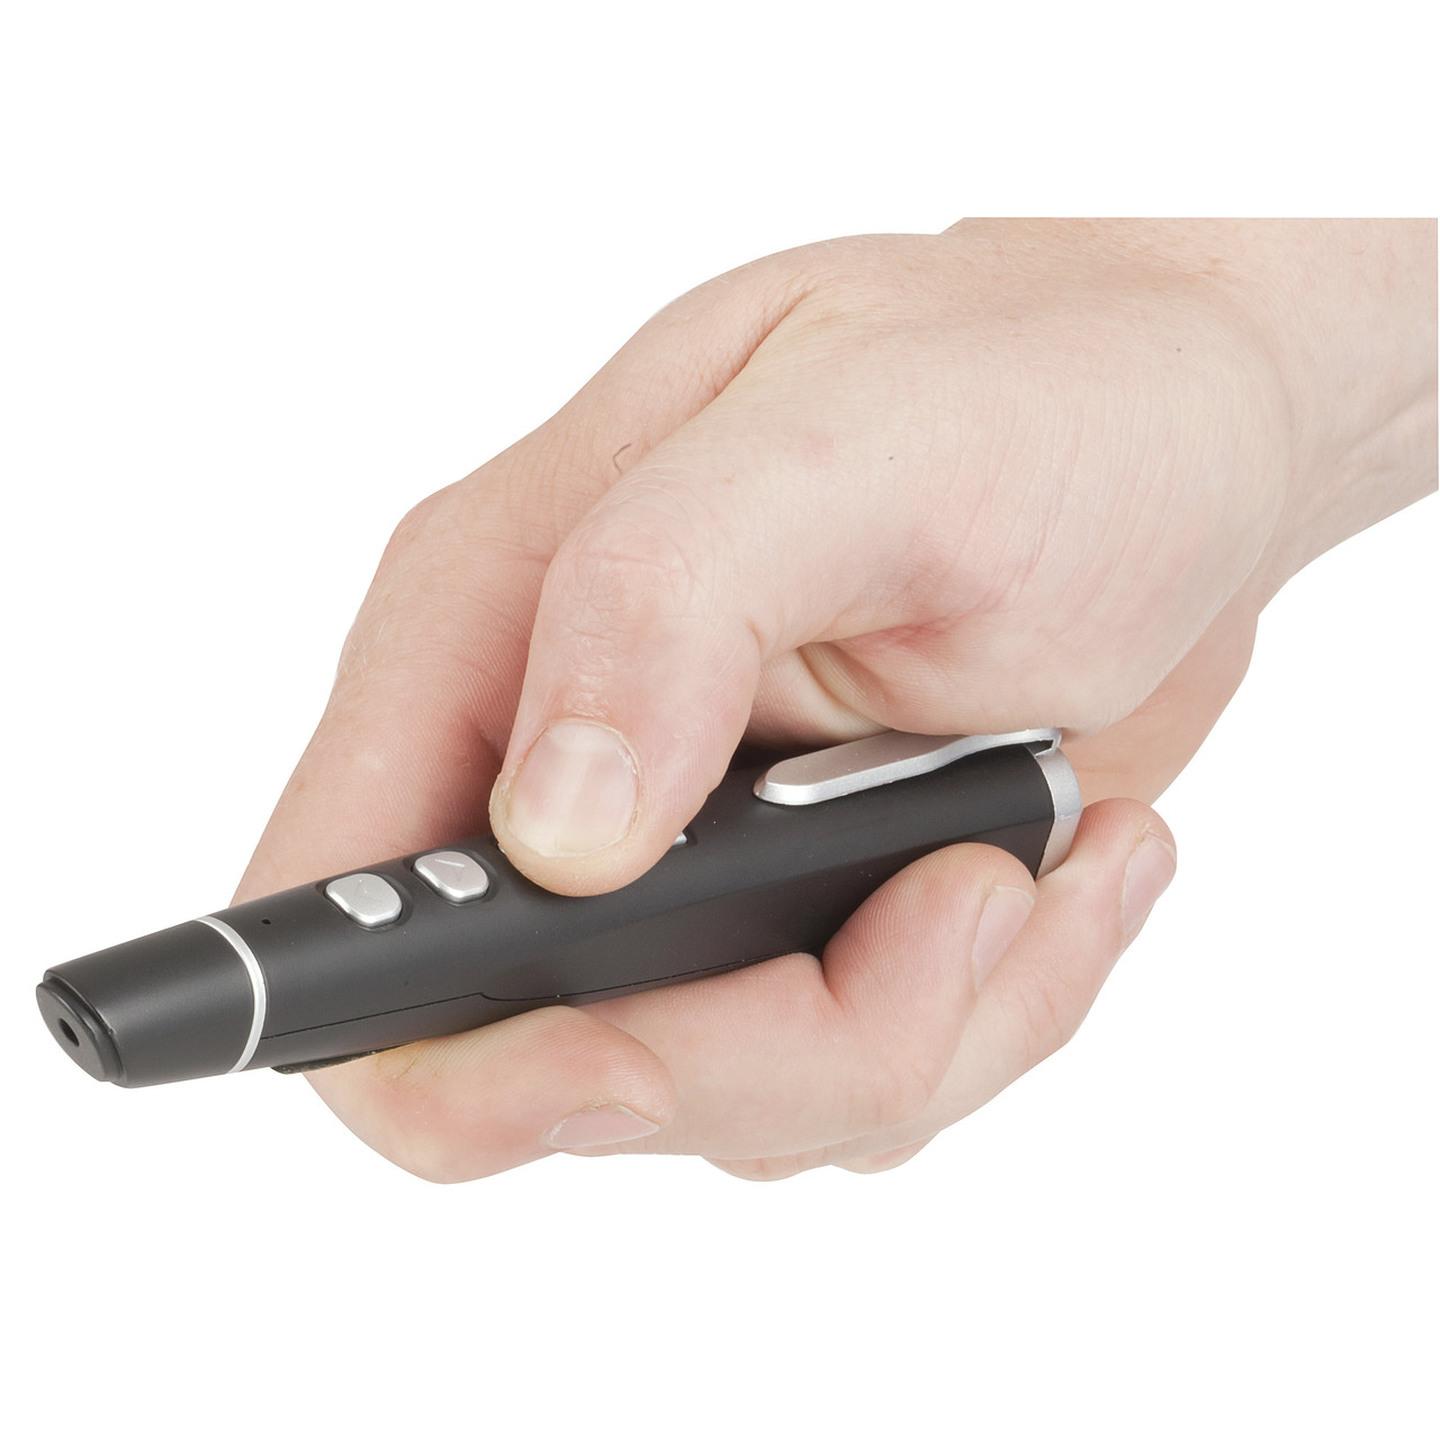 Pen Style RF Presenter with Laser Pointer